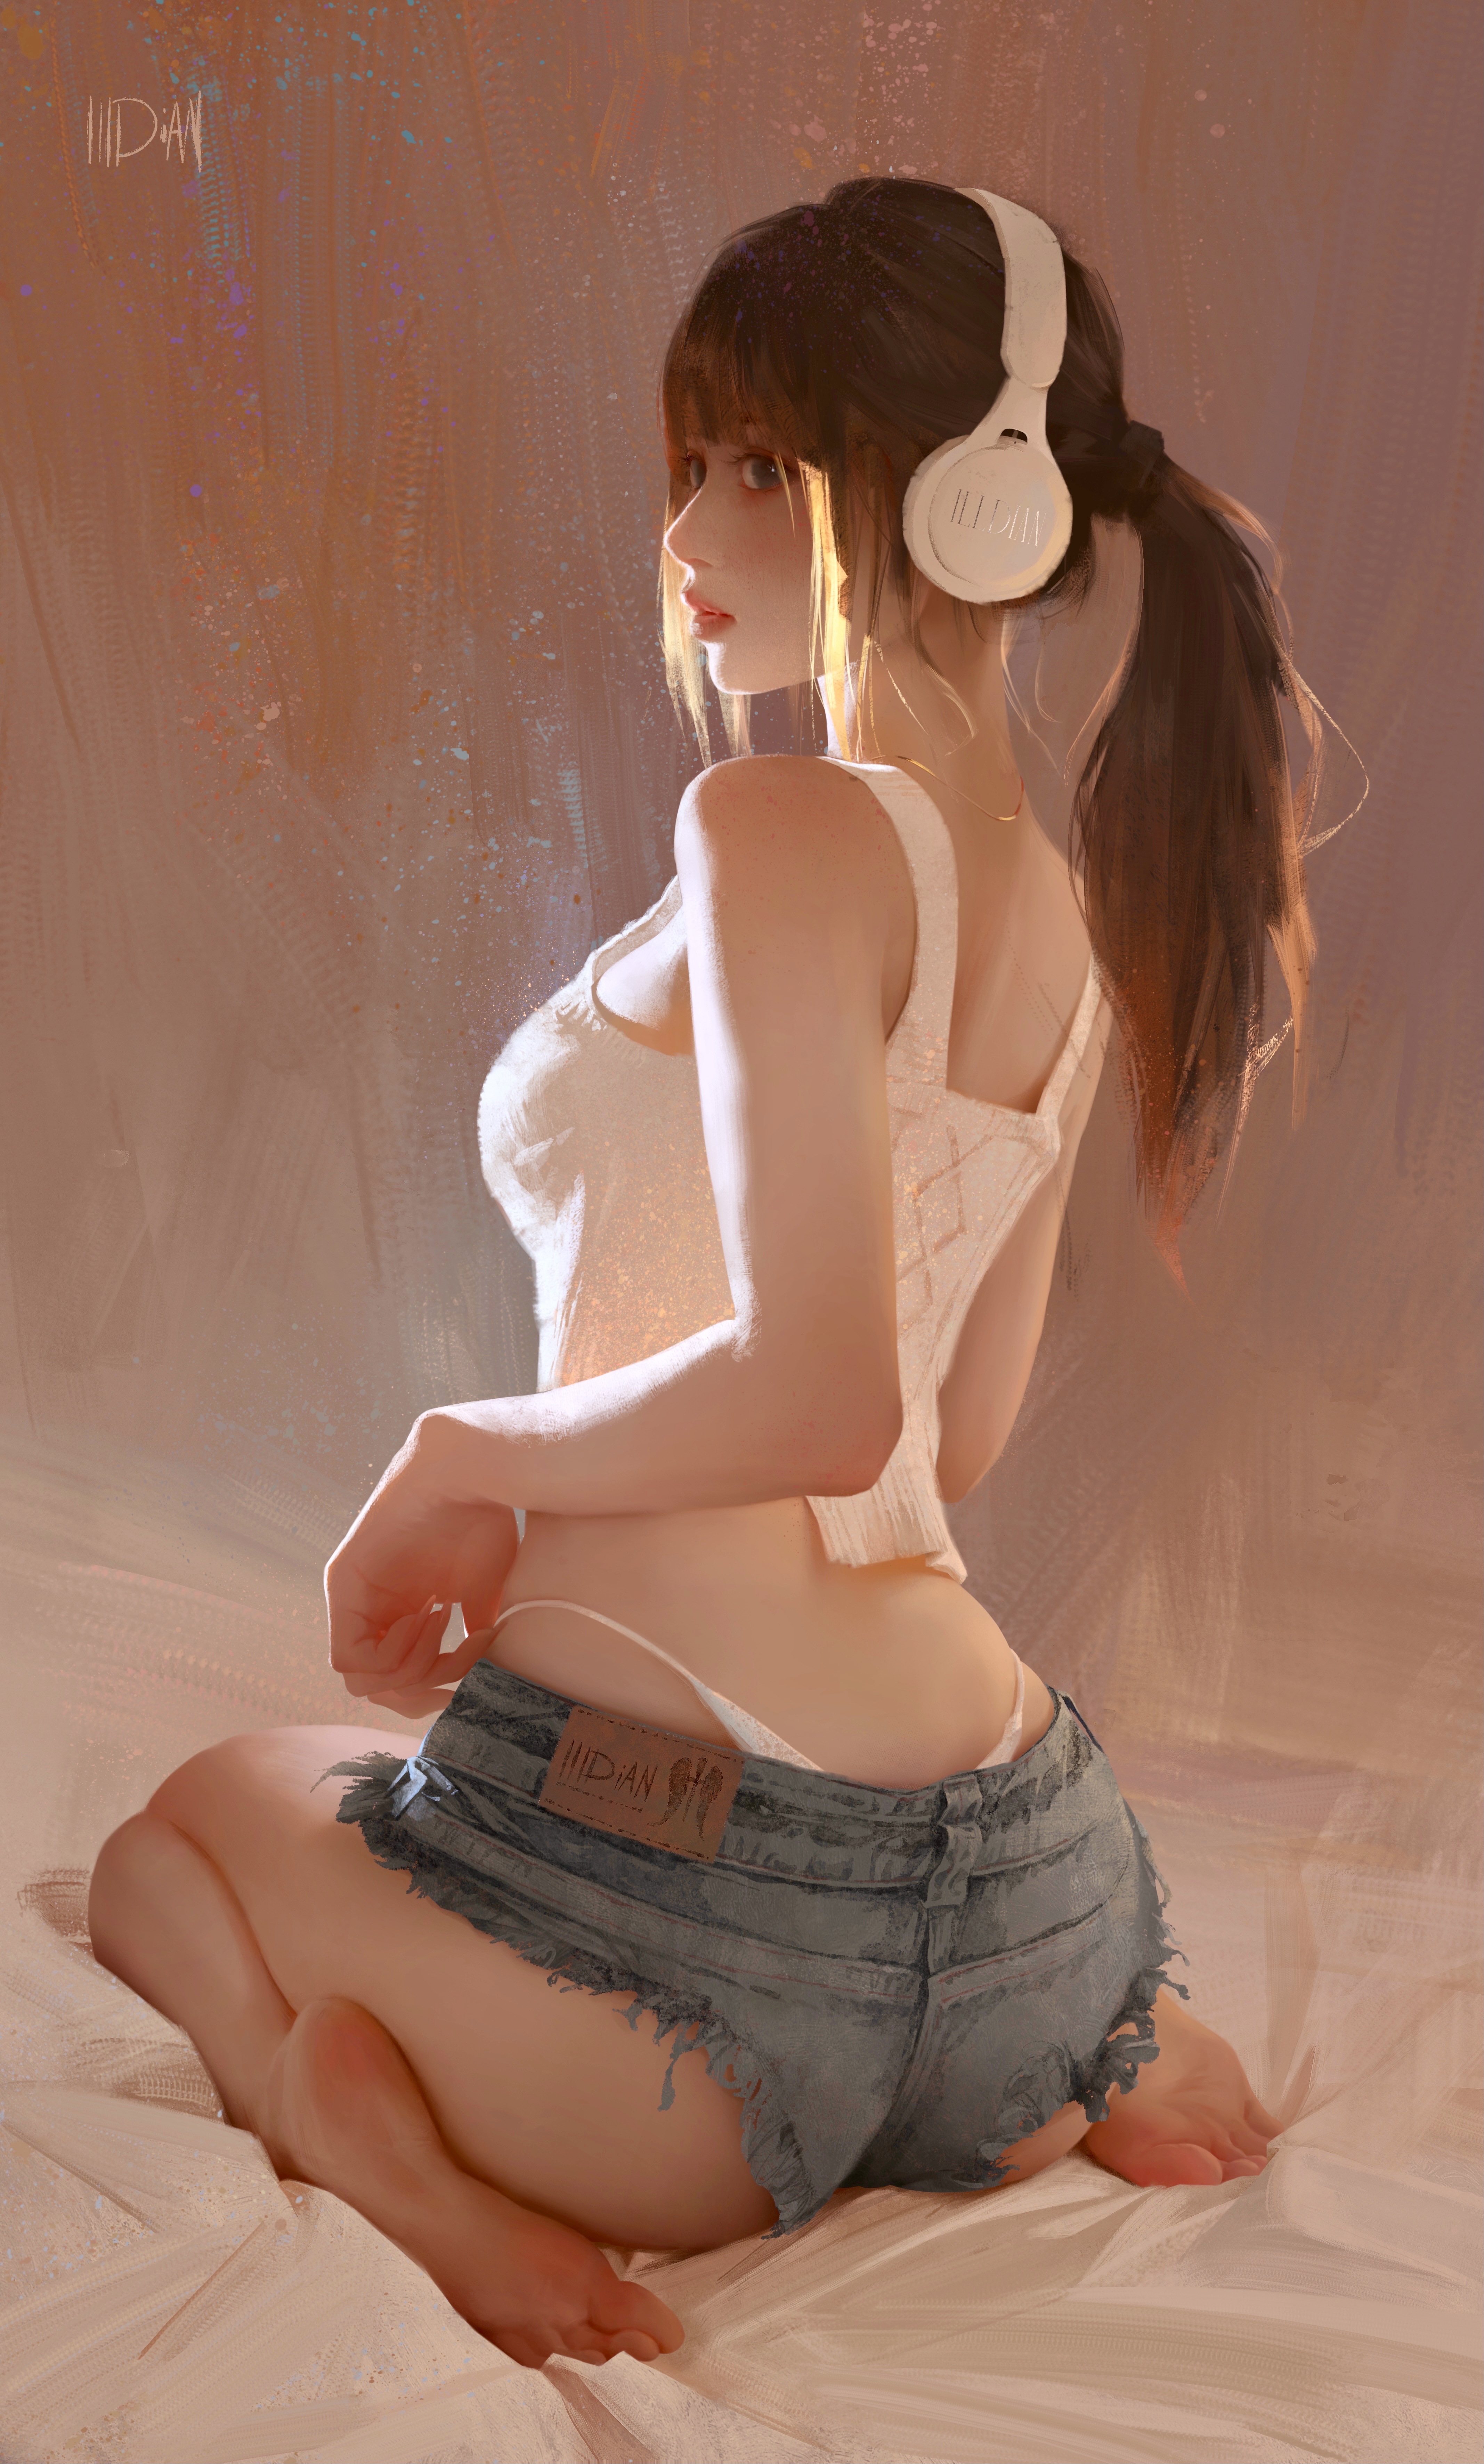 General 4269x7087 women brunette ass ILLDIAN thighs ponytail back jean shorts tight shorts feet toes headphones white tops top kneeling short shorts